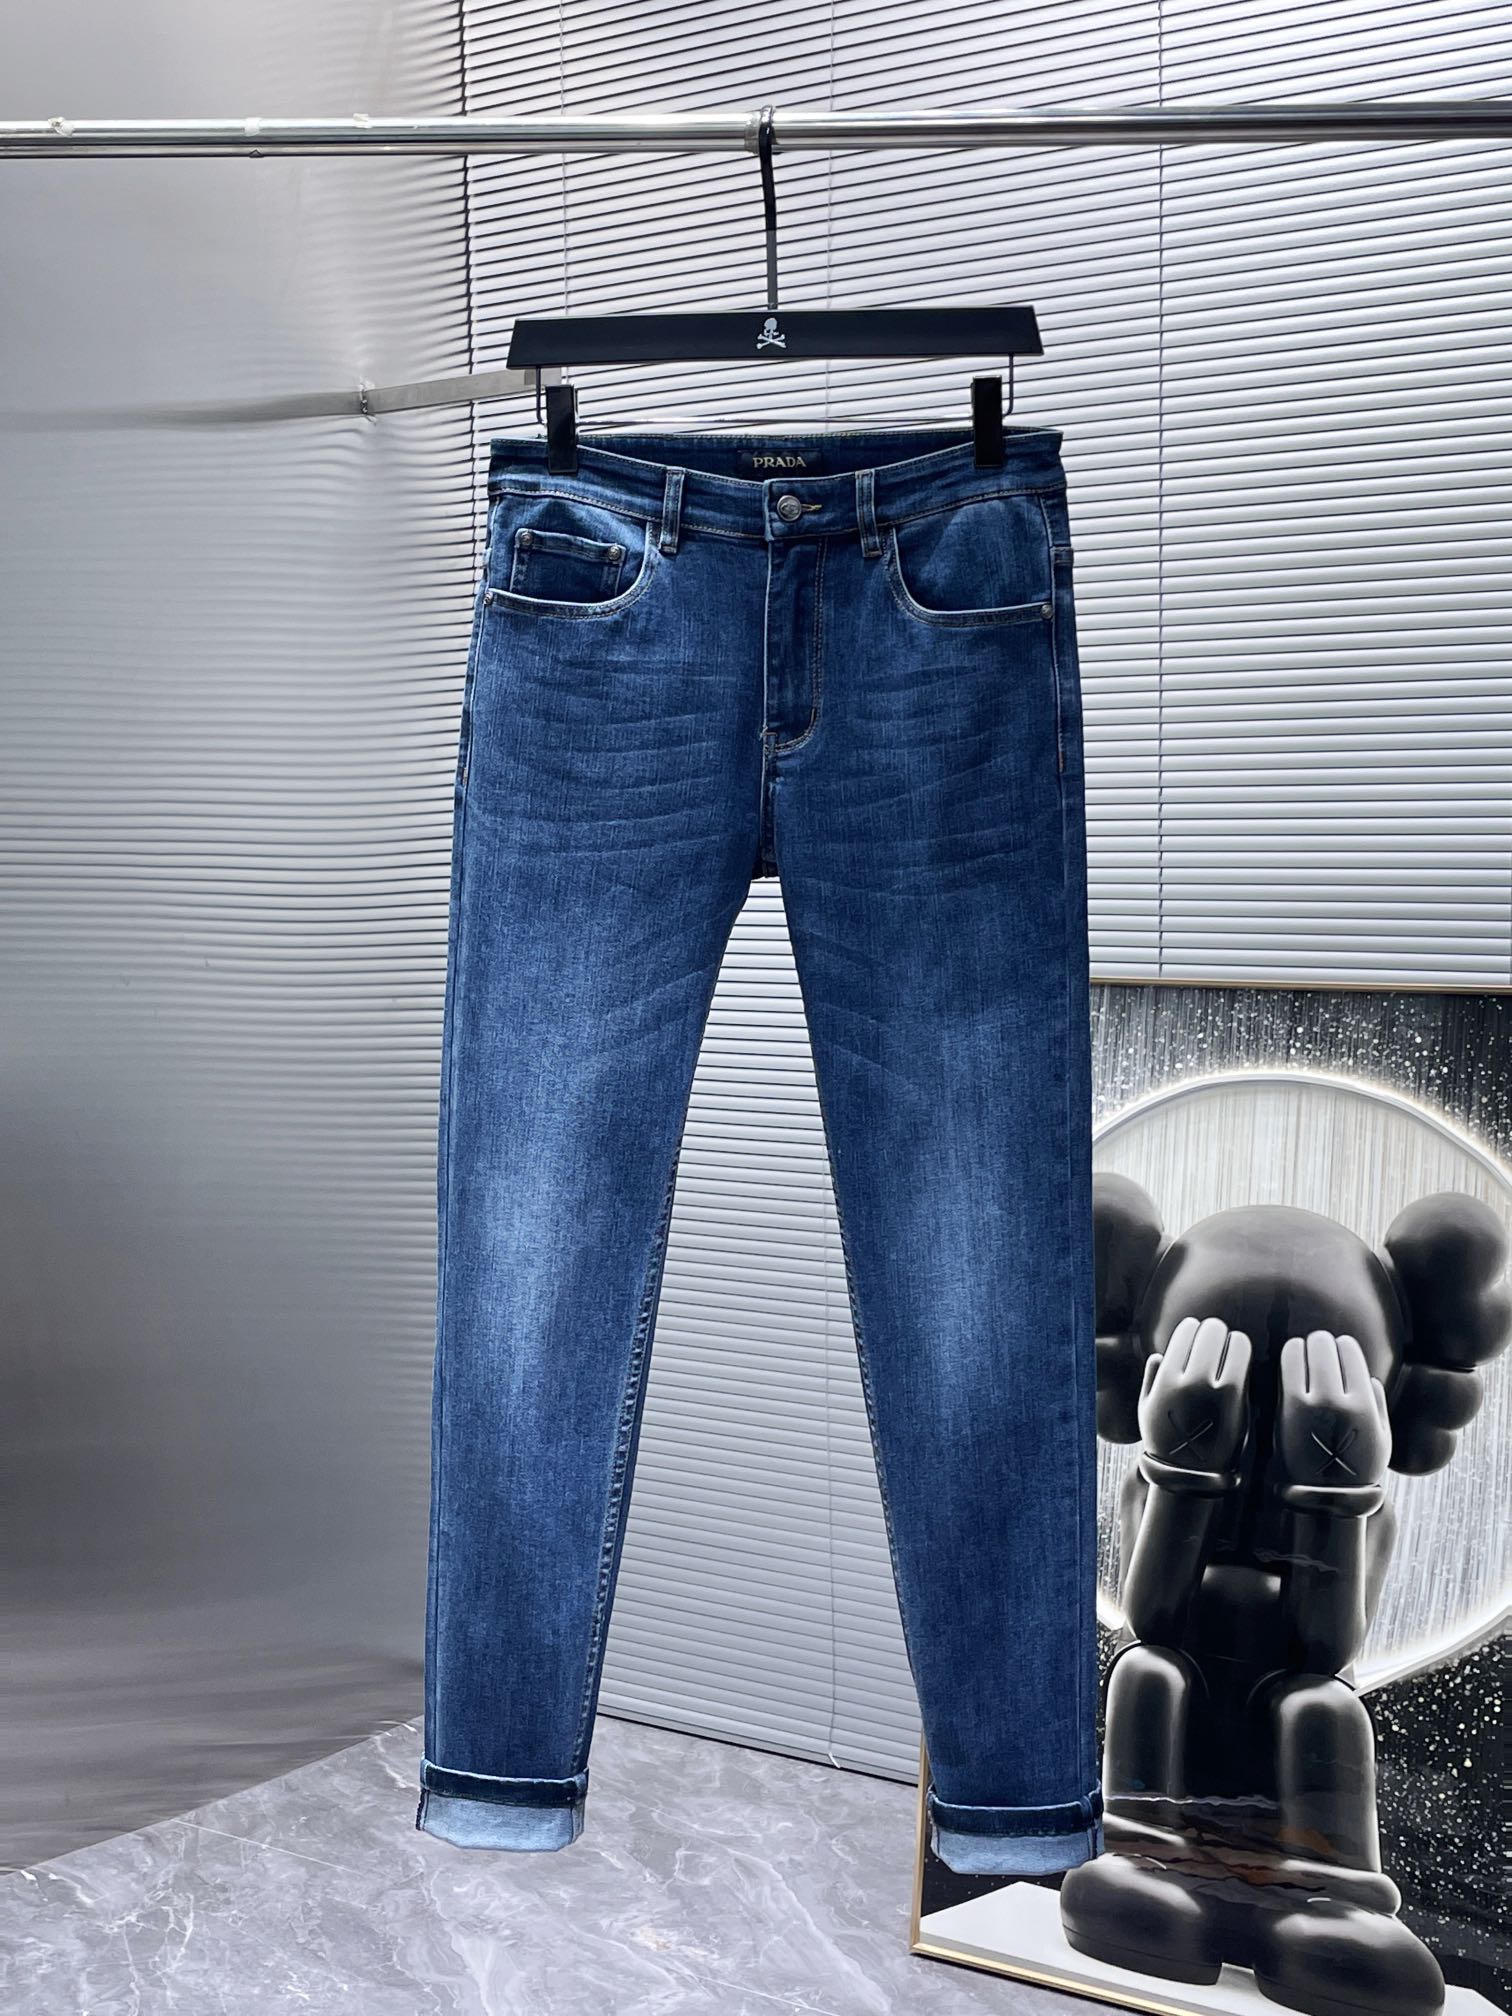 Prada Clothing Jeans Fall Collection Casual